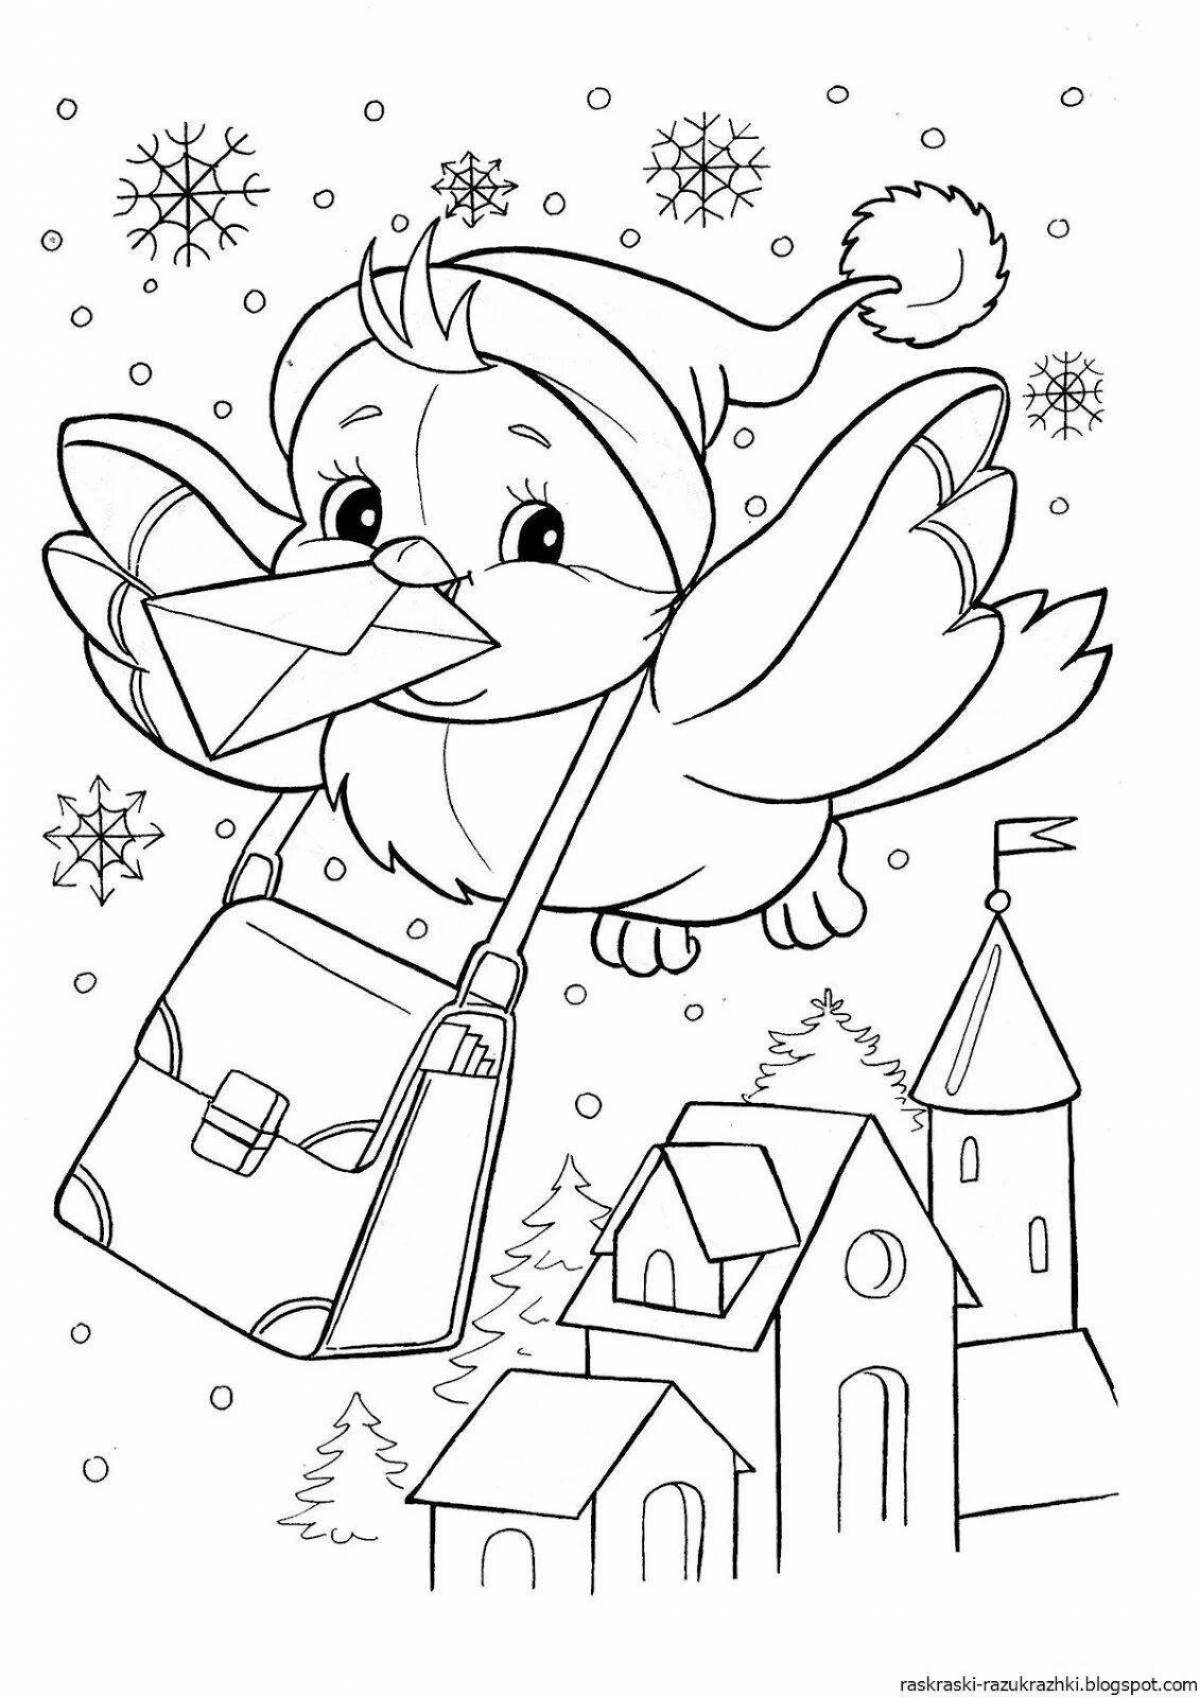 Colorful Christmas coloring book for 3-4 year olds